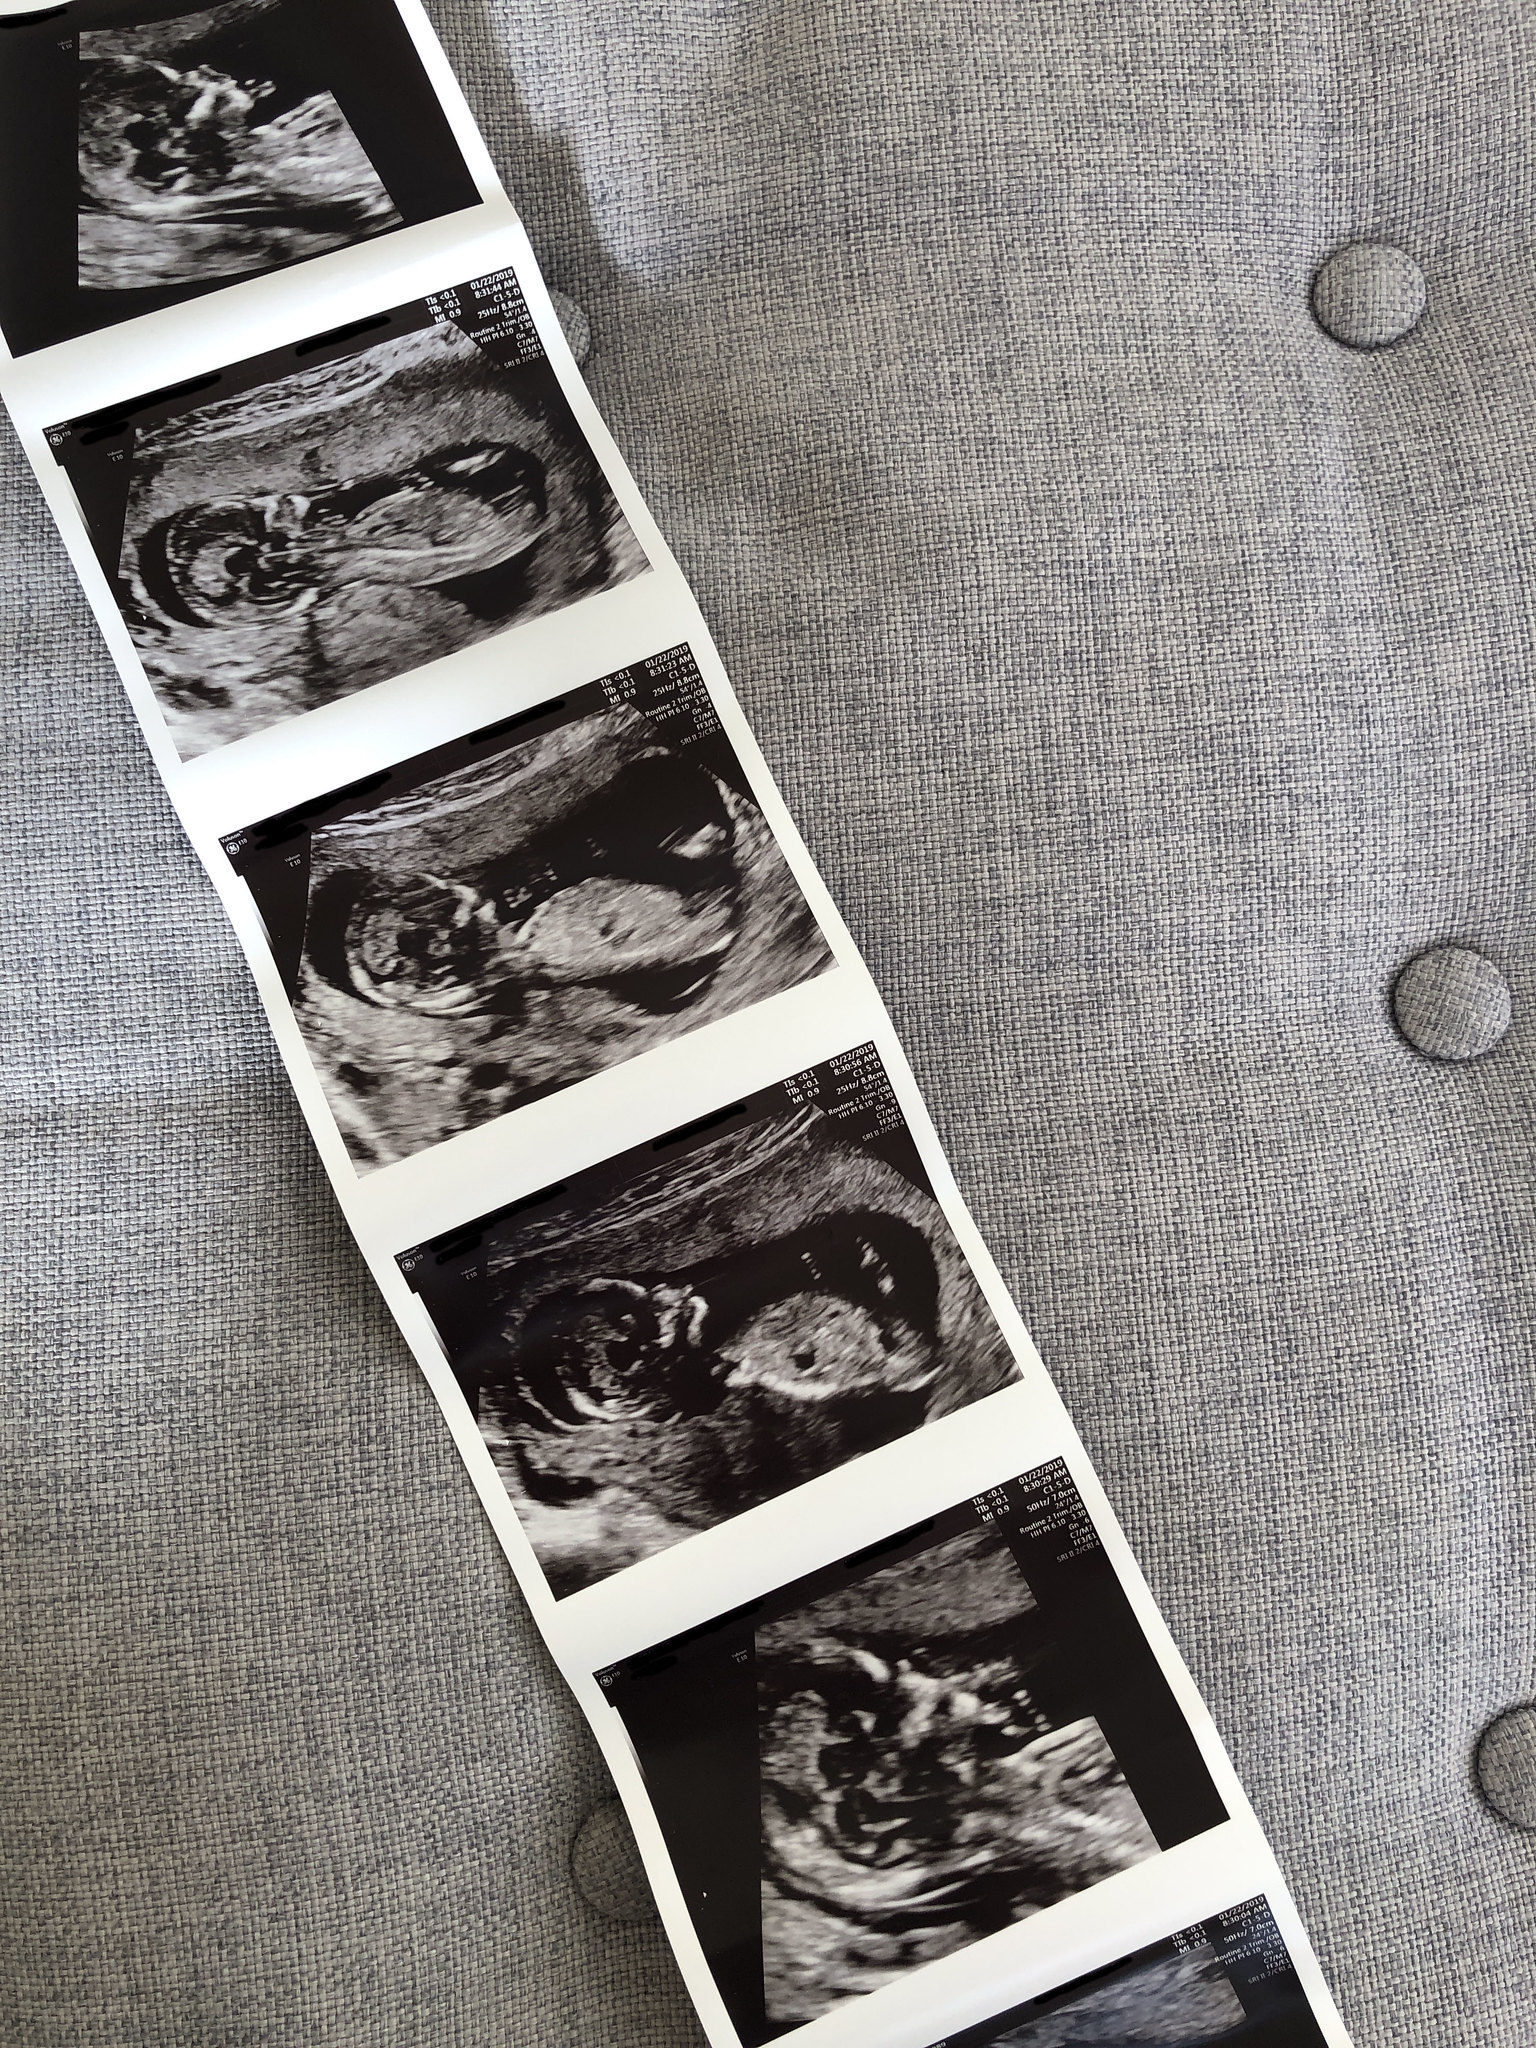 Pregnancy announcement, baby number 2, 2 under 2, pregnancy blog, scan photos, mommy blog, 14 weeks pregnant